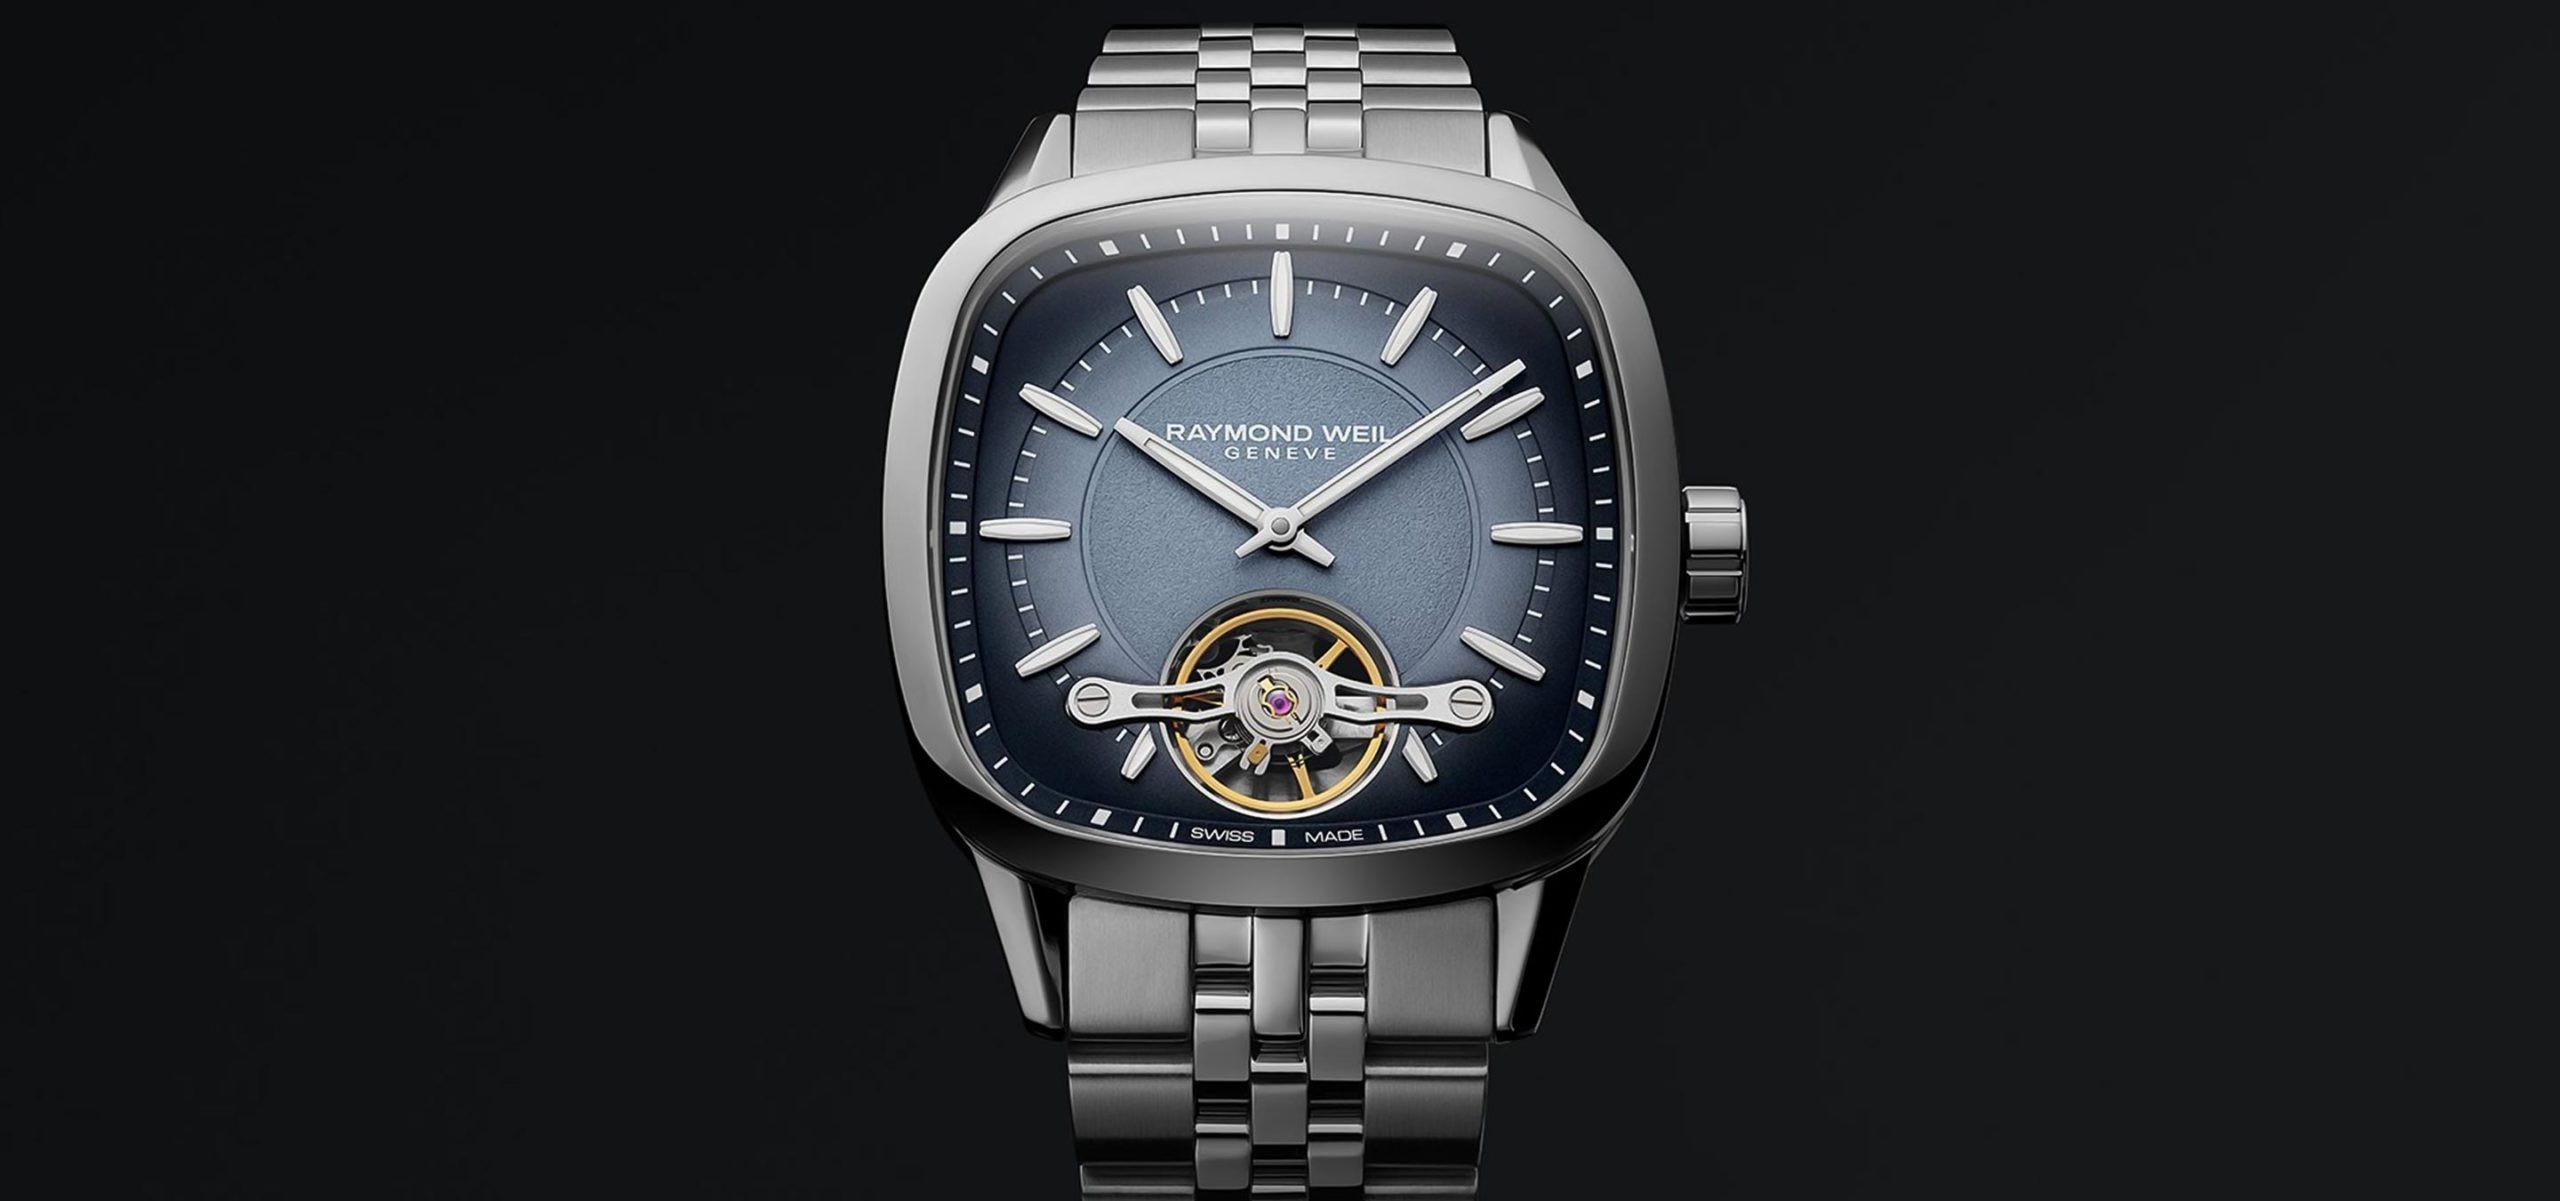 Raymond Weil Add Square-Shaped Watches To Their Freelancer Collection